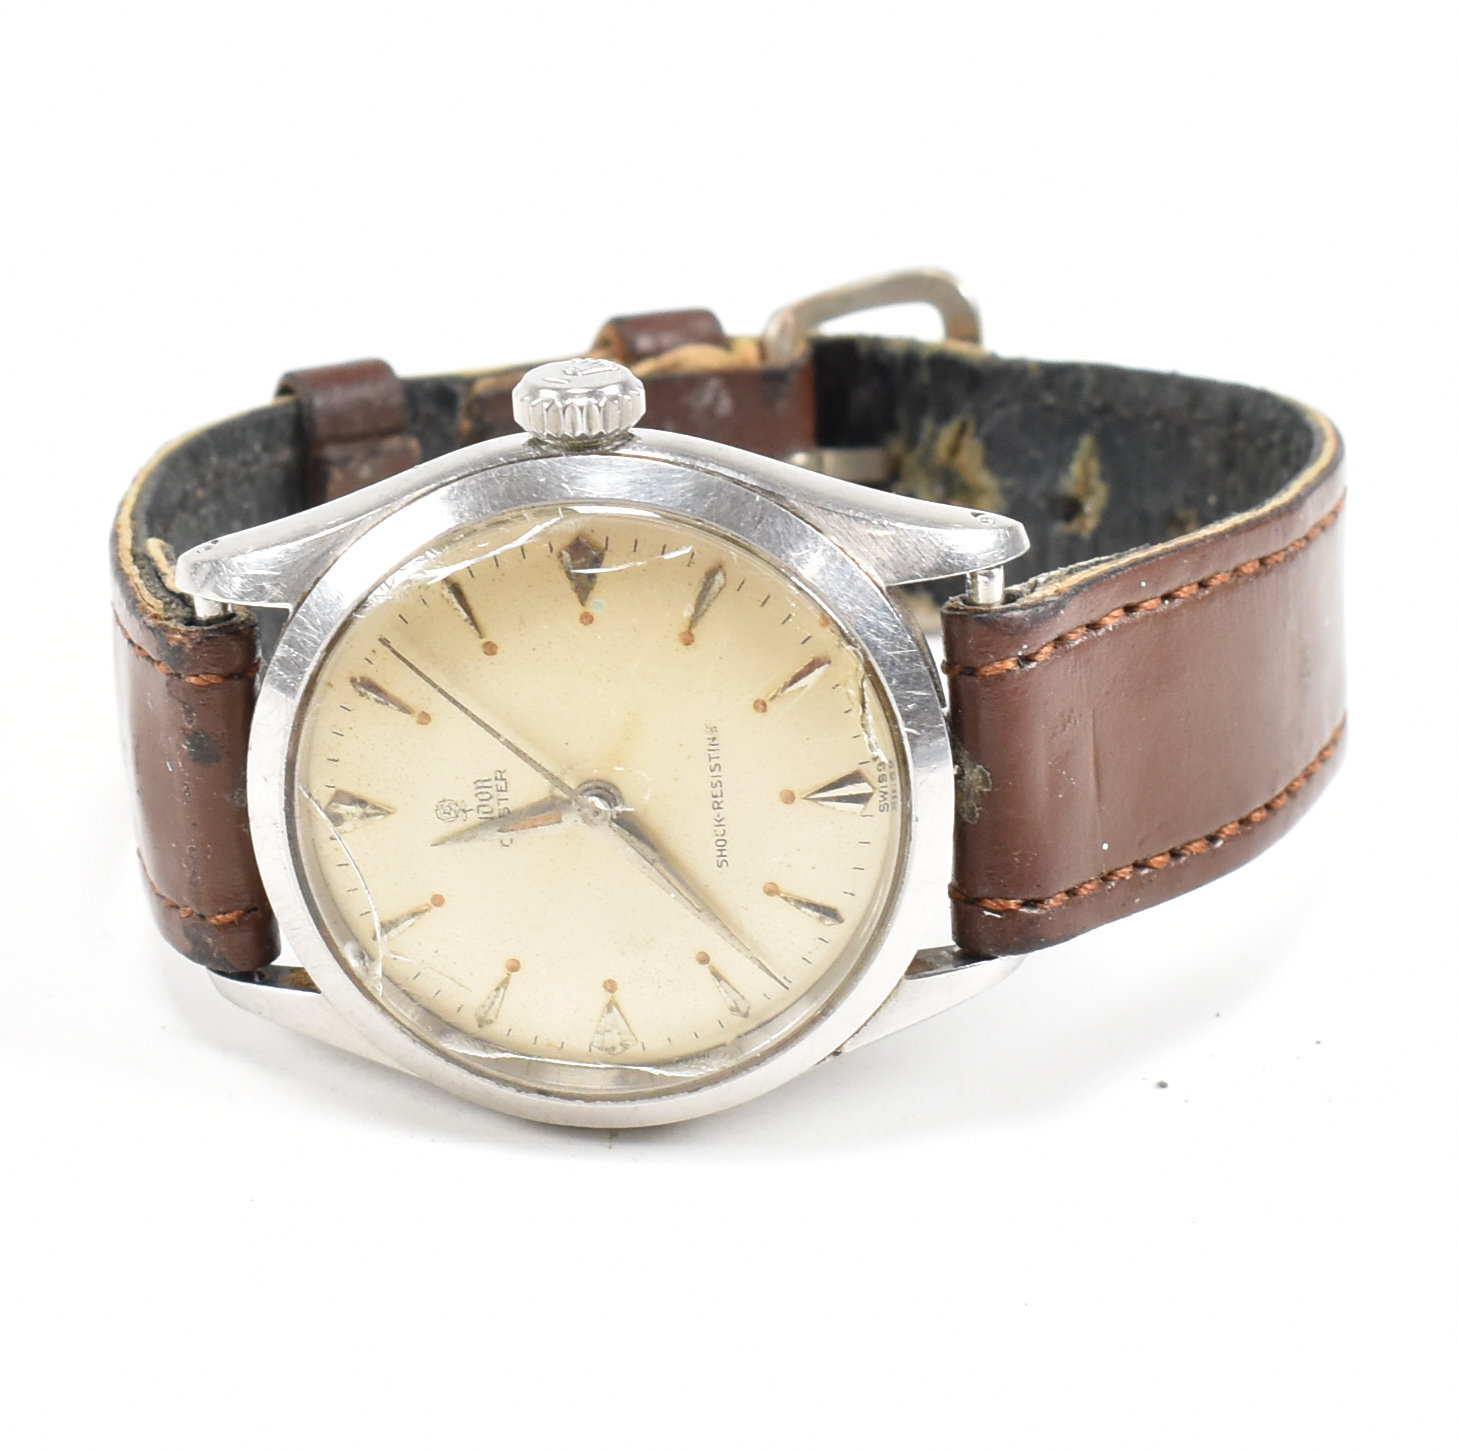 MID CENTURY TUDOR OYSTER STAINLESS STEEL WRISTWATCH - Image 2 of 7